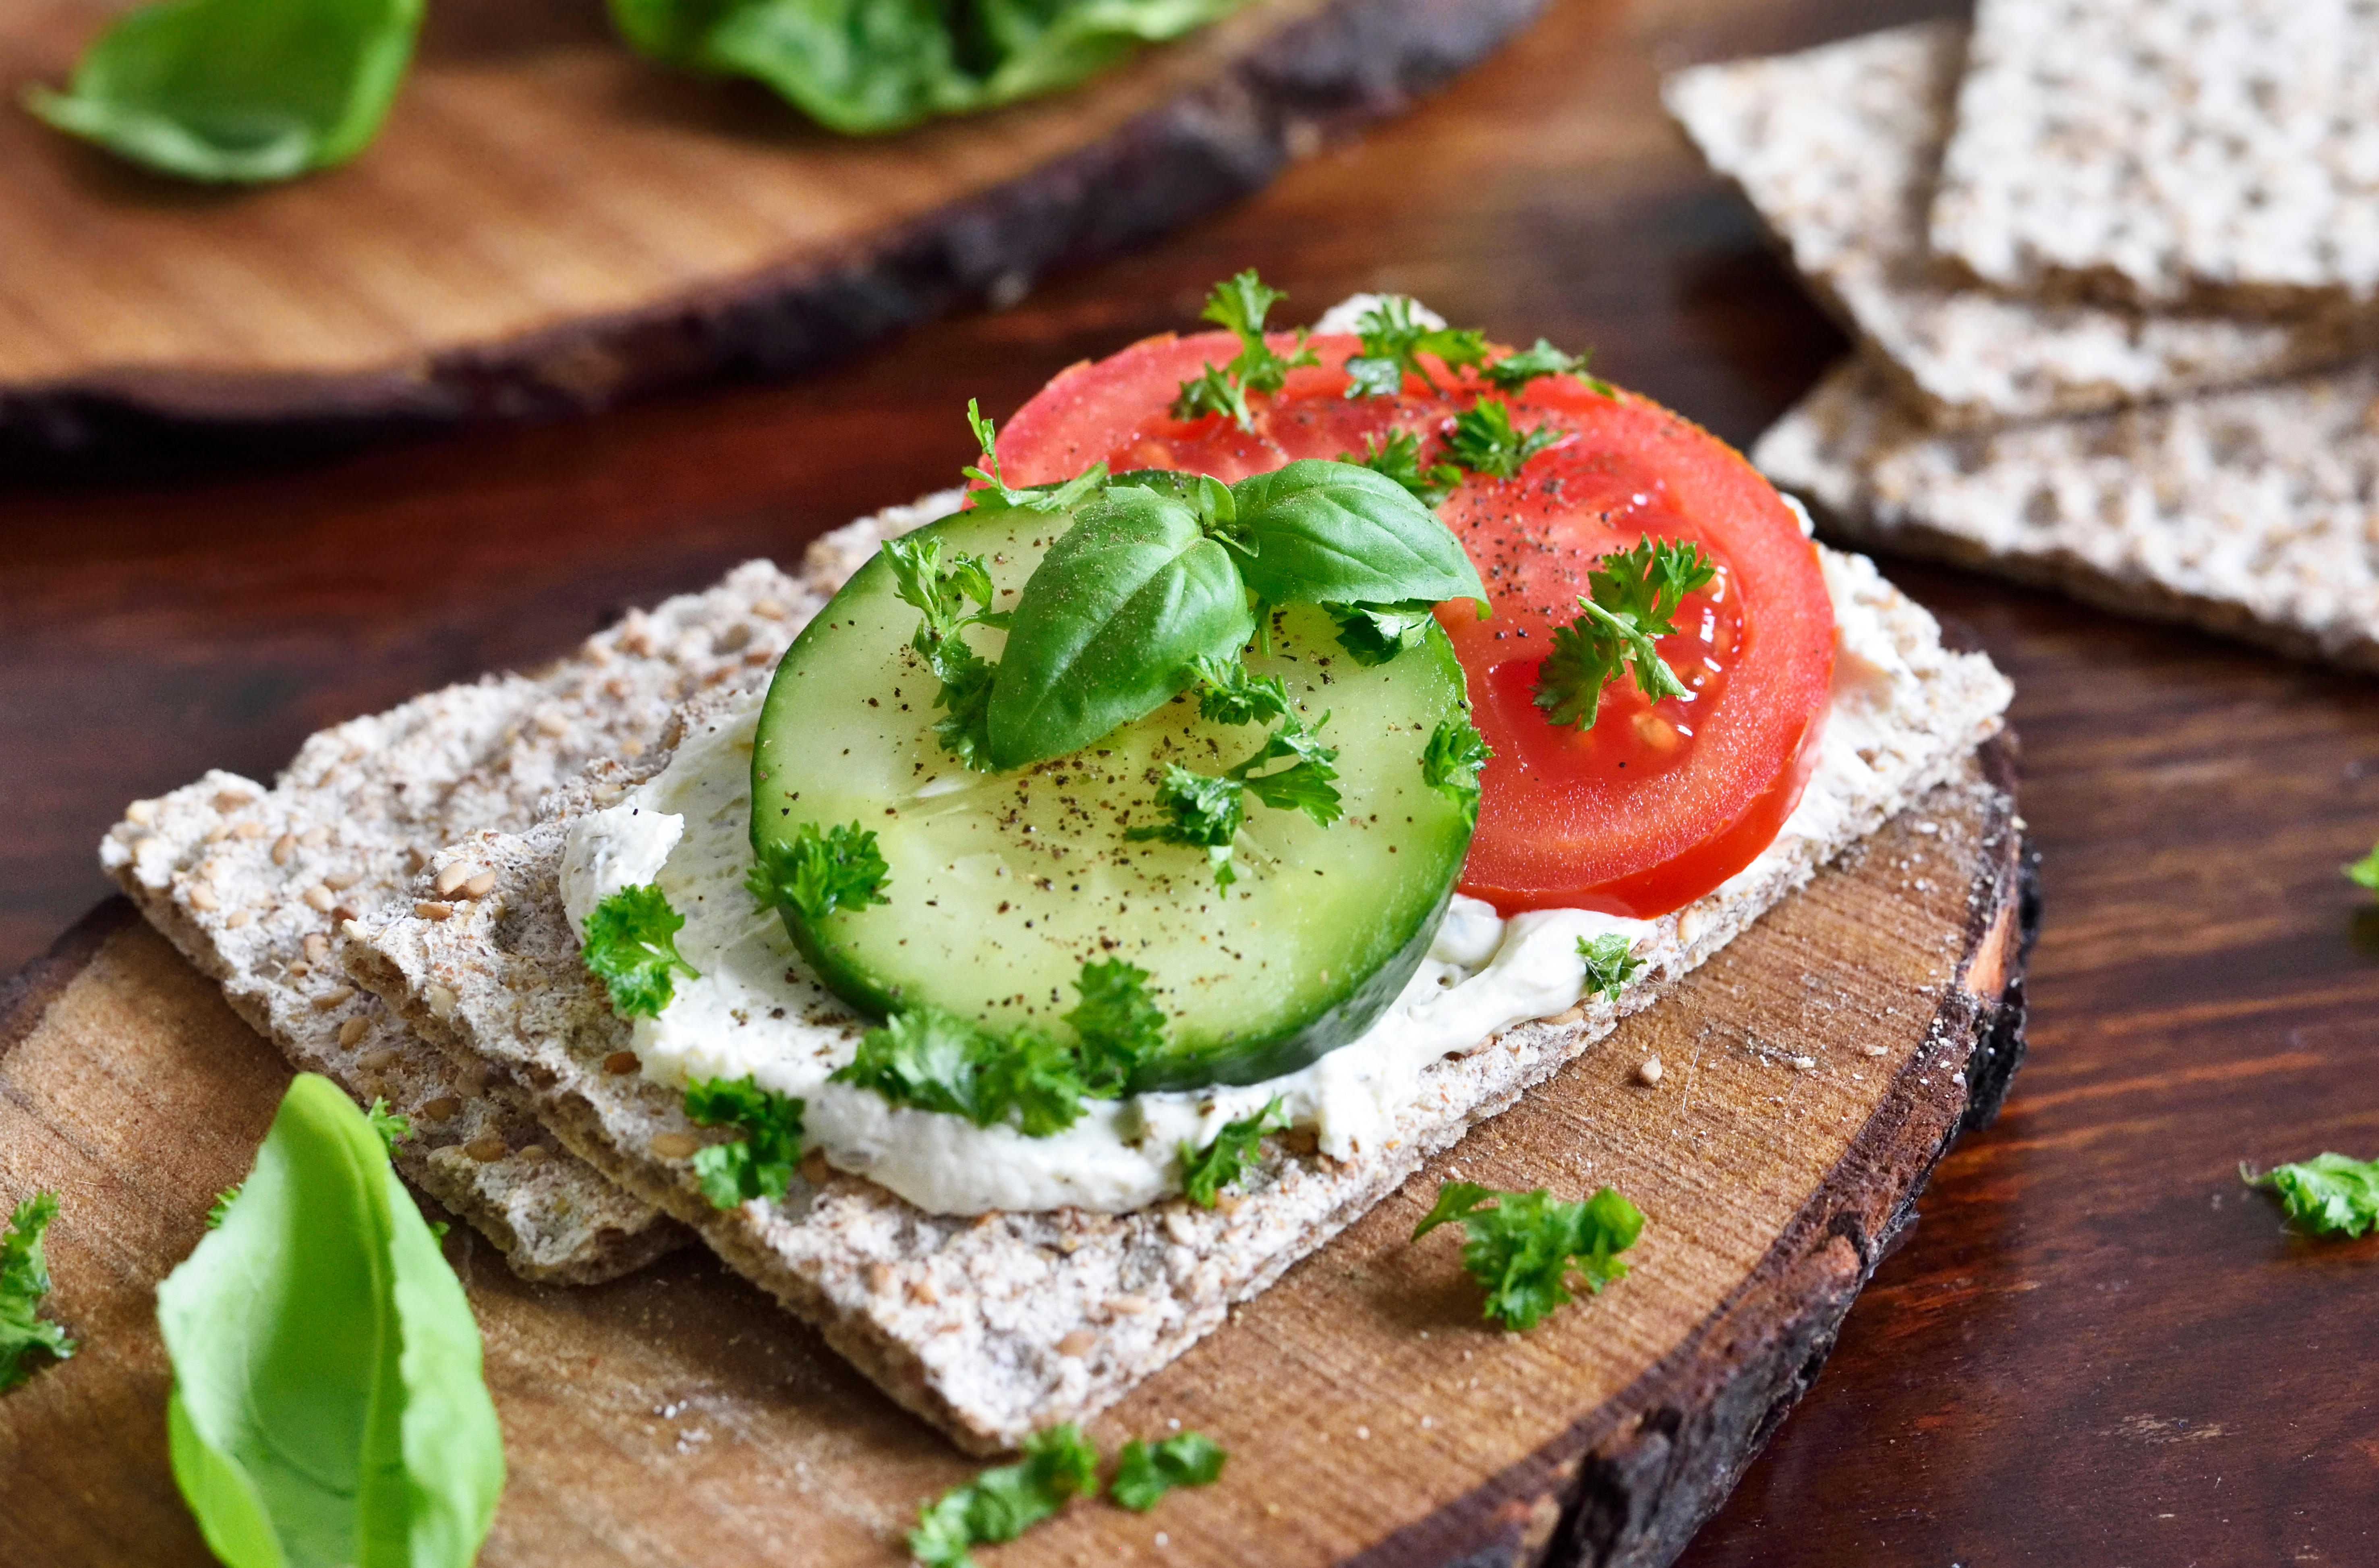 Crisp bread with humous, tomato and cucumber